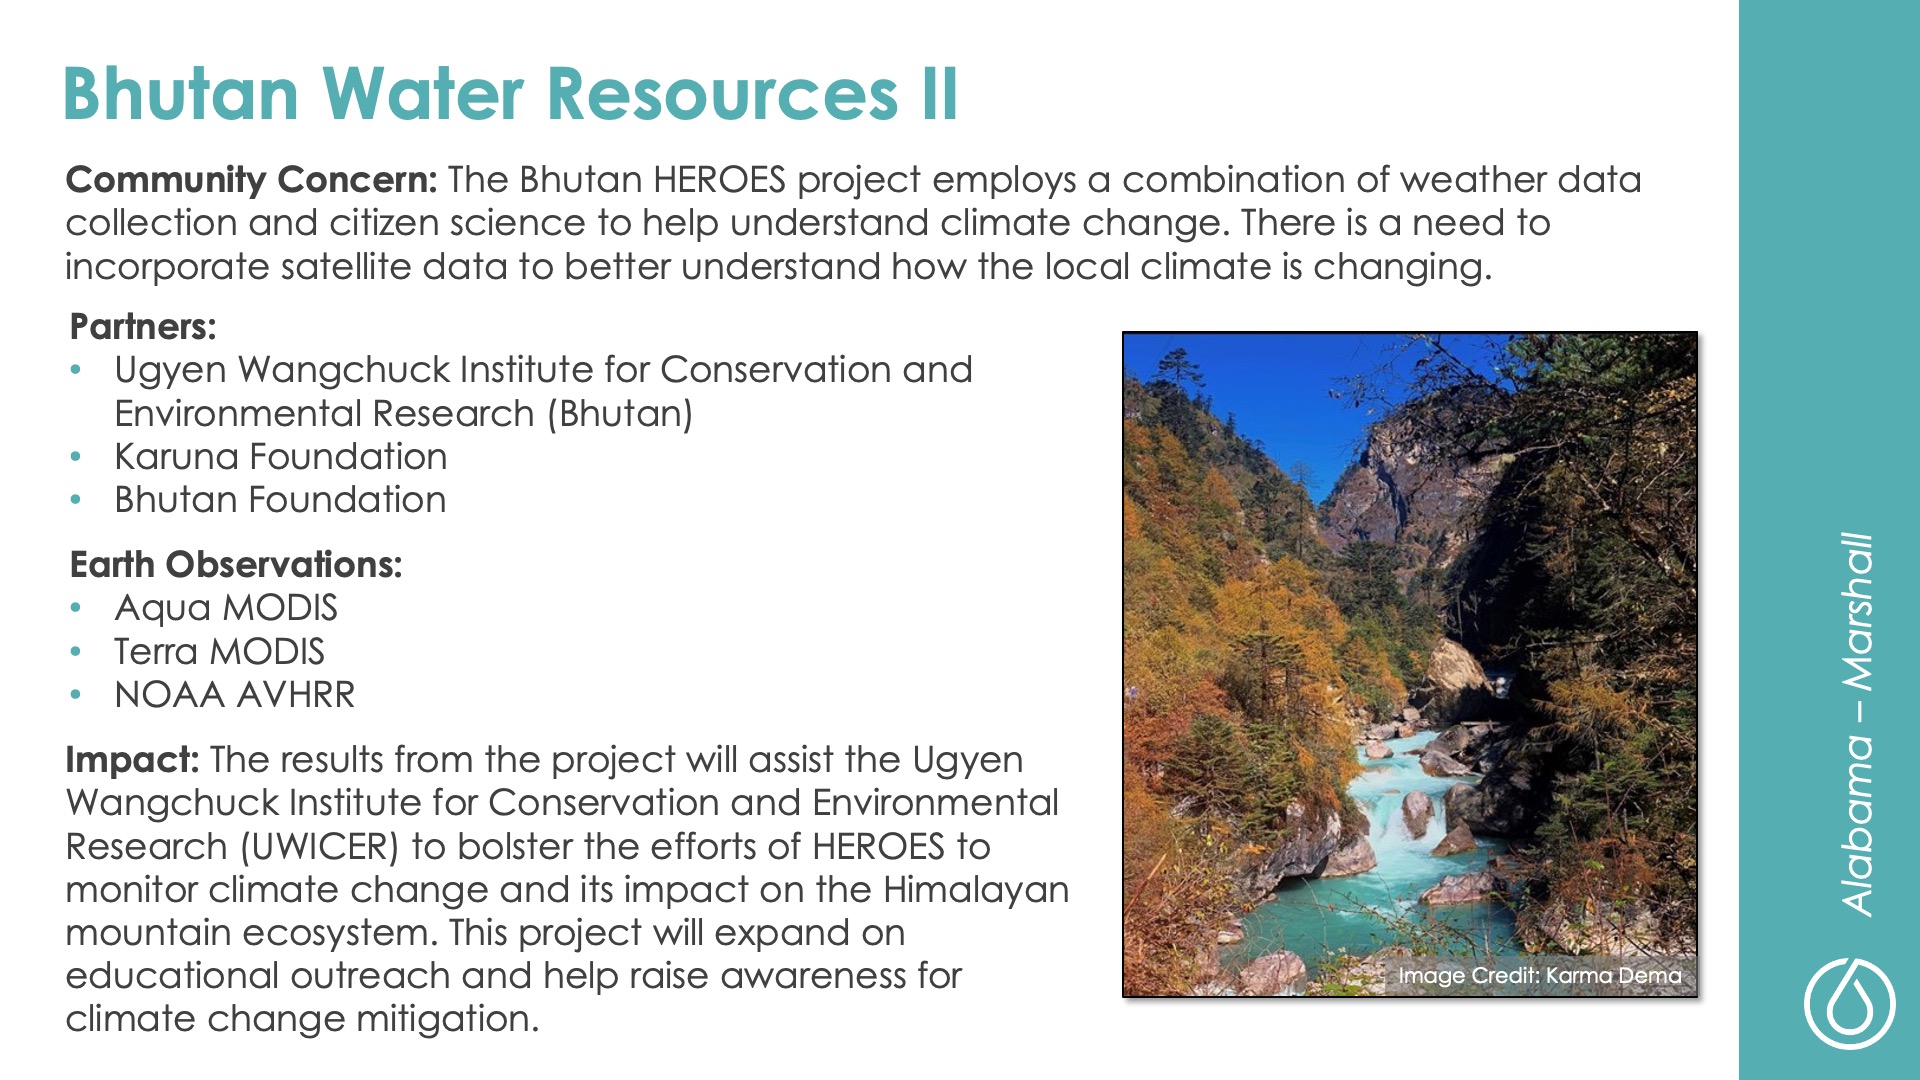 Slide title: Bhutan Water Resources II DEVELOP Node: Alabama - Marshall Community Concern: The Bhutan HEROES project employs a combination of weather data collection and citizen science to help understand climate change. There is a need to incorporate satellite data to better understand how the local climate is changing.  Impact: The results from the project will assist the Ugyen Wangchuck Institute for Conservation and Environmental Research (UWICER) to bolster the efforts of HEROES to monitor climate change and its impact on the Himalayan mountain ecosystem. This project will expand on educational outreach and help raise awareness for climate change mitigation.  Partners: Ugyen Wangchuck Institute for Conservation and Environmental Research (Bhutan), Karuna Foundation, Bhutan Foundation  Earth Observations: Aqua MODIS, Terra MODIS, NOAA AVHRR